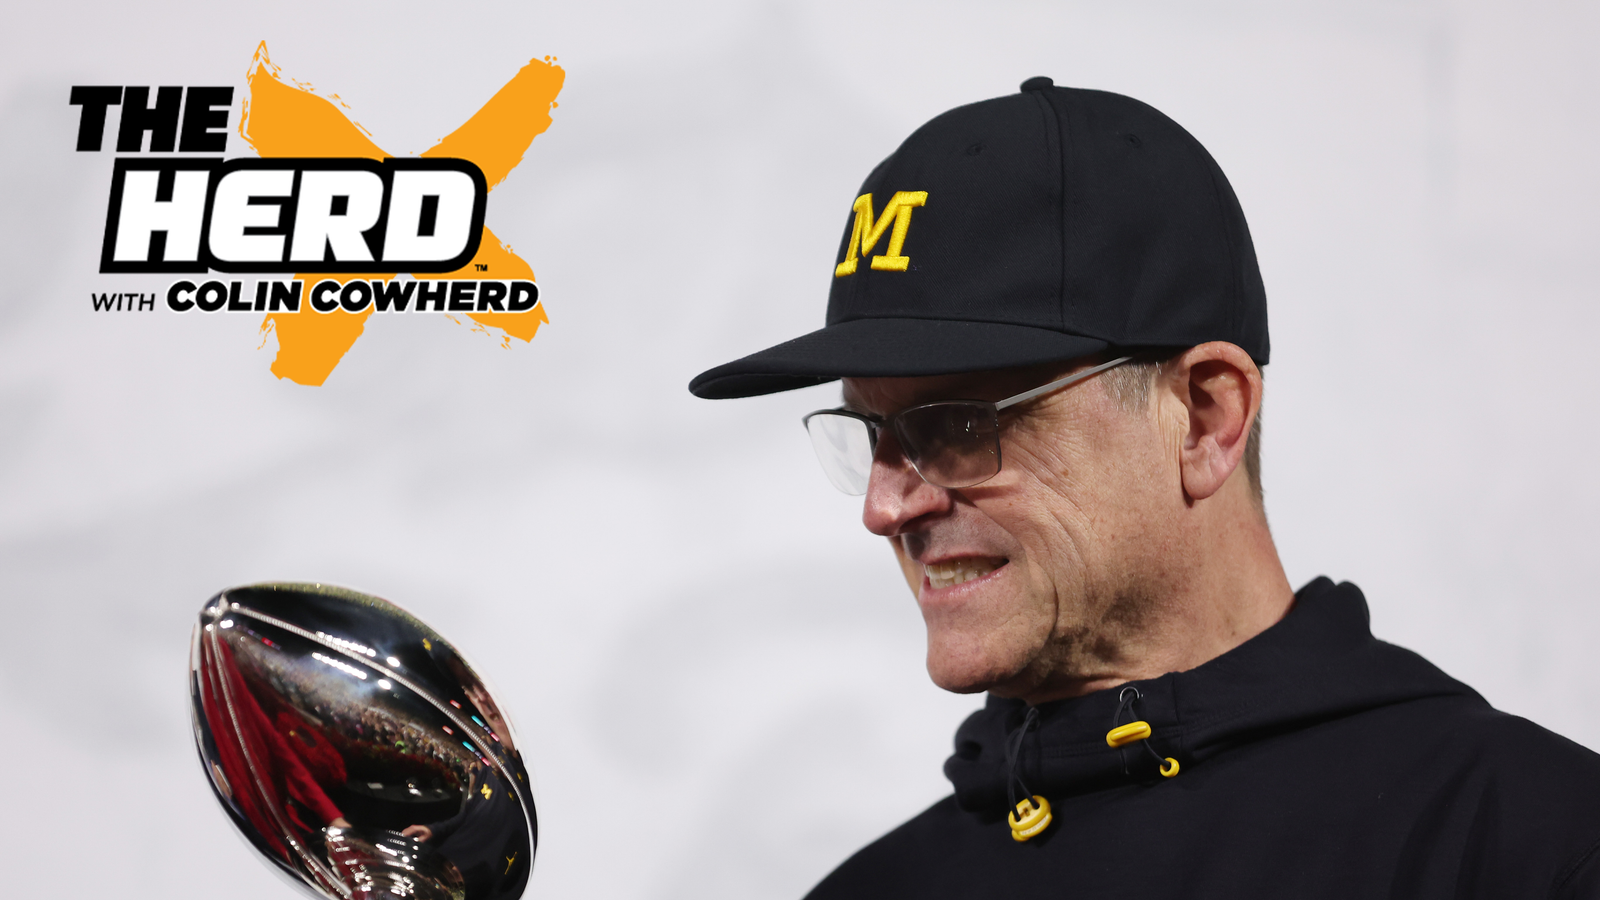 Impressed with Jim Harbaugh and Michigan?